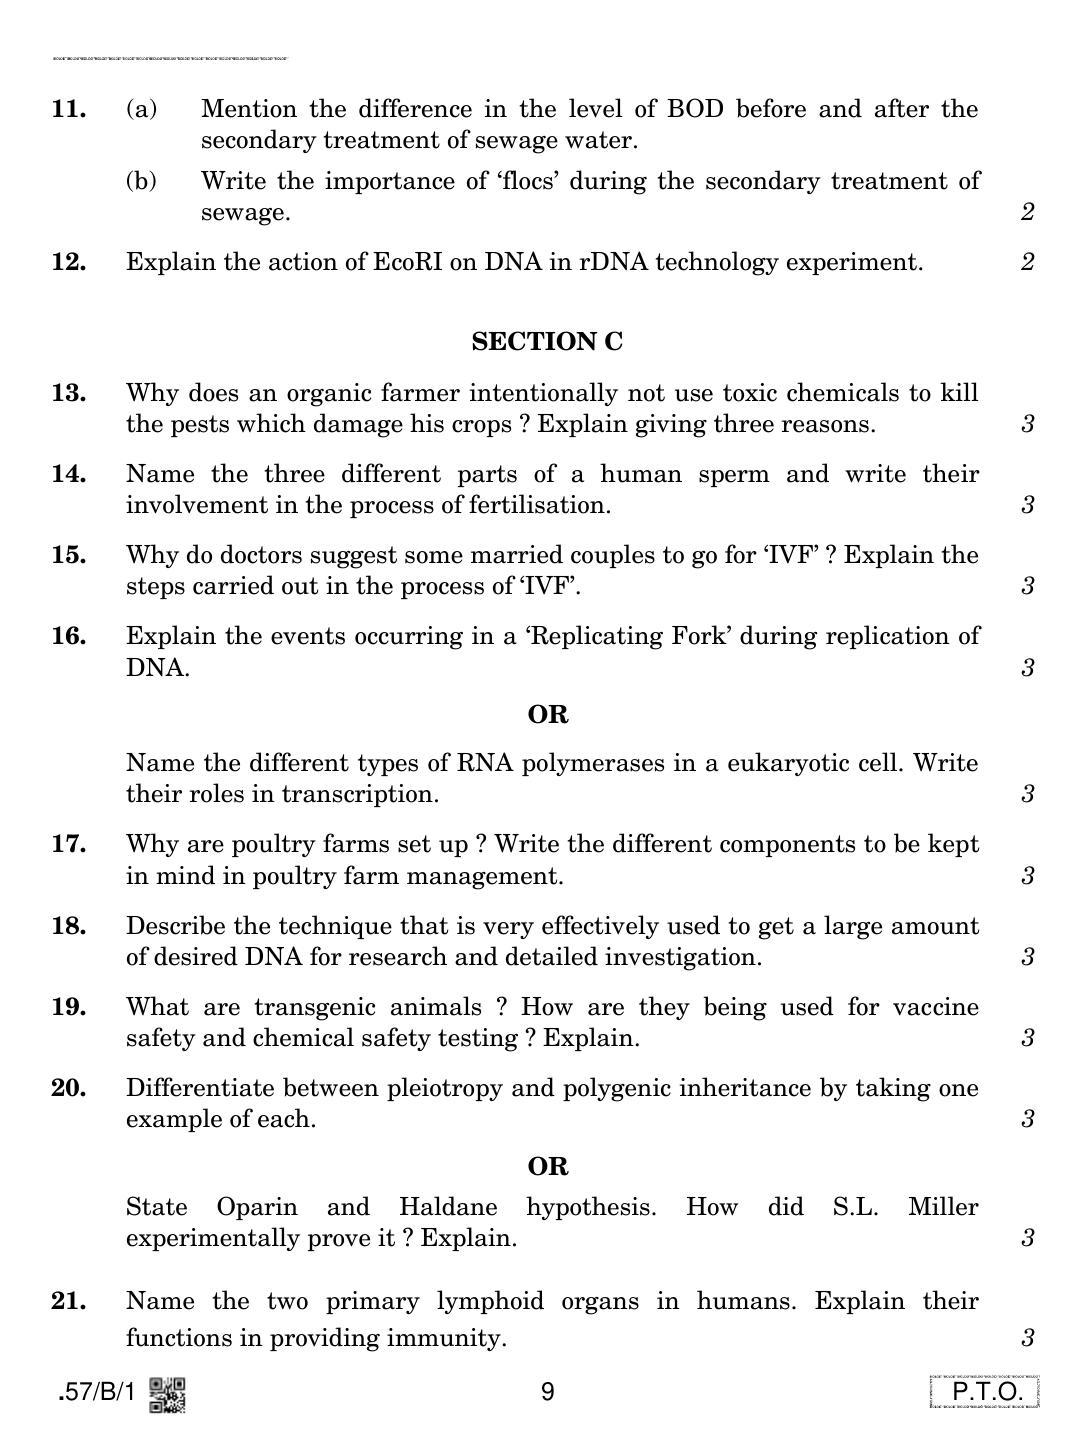 CBSE Class 12 57-C-1 - Biology 2020 Compartment Question Paper - Page 9